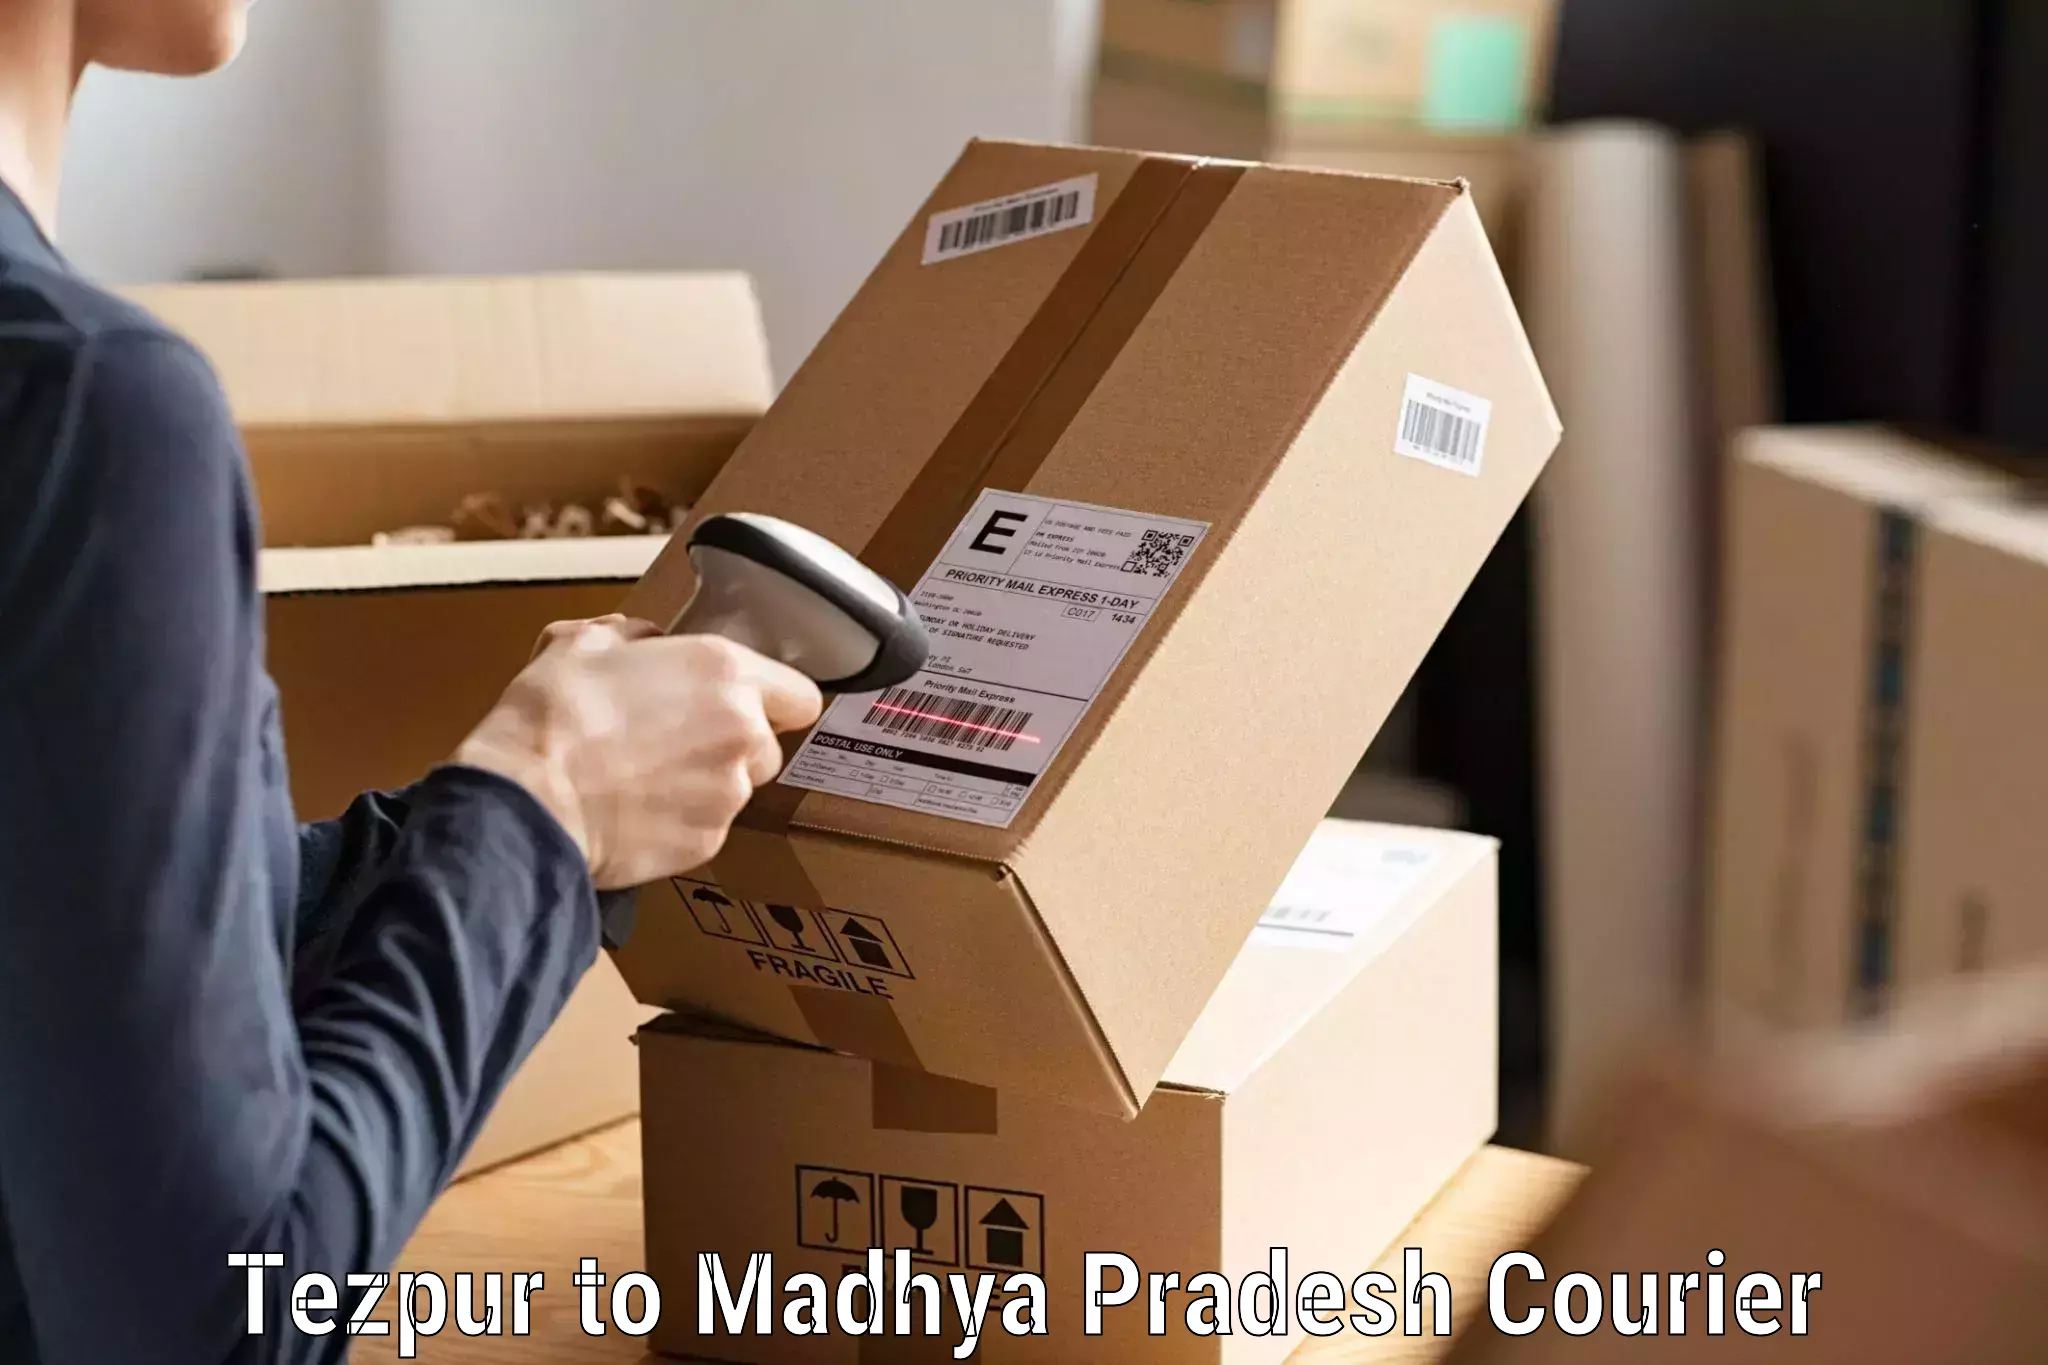 Dynamic parcel delivery Tezpur to Indore